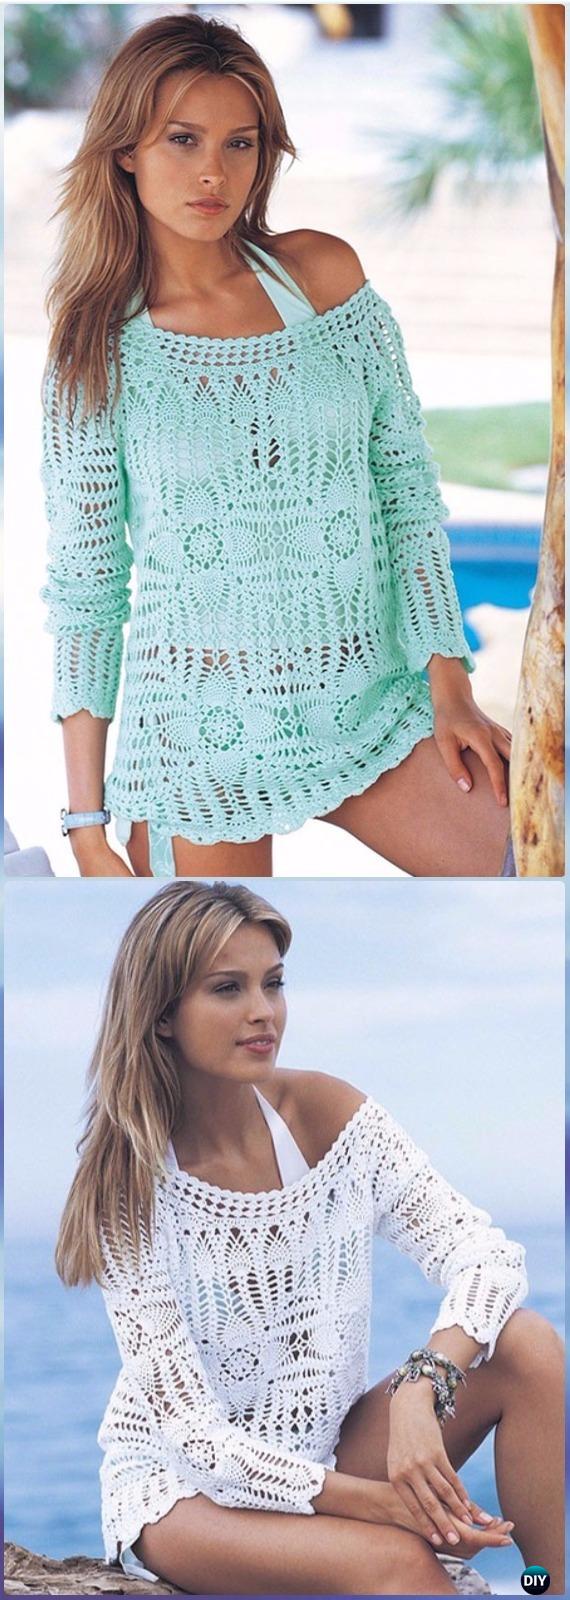 Crochet Pineapple Beach Cover Up Free Pattern - Crochet Beach Cover Up Free Patterns